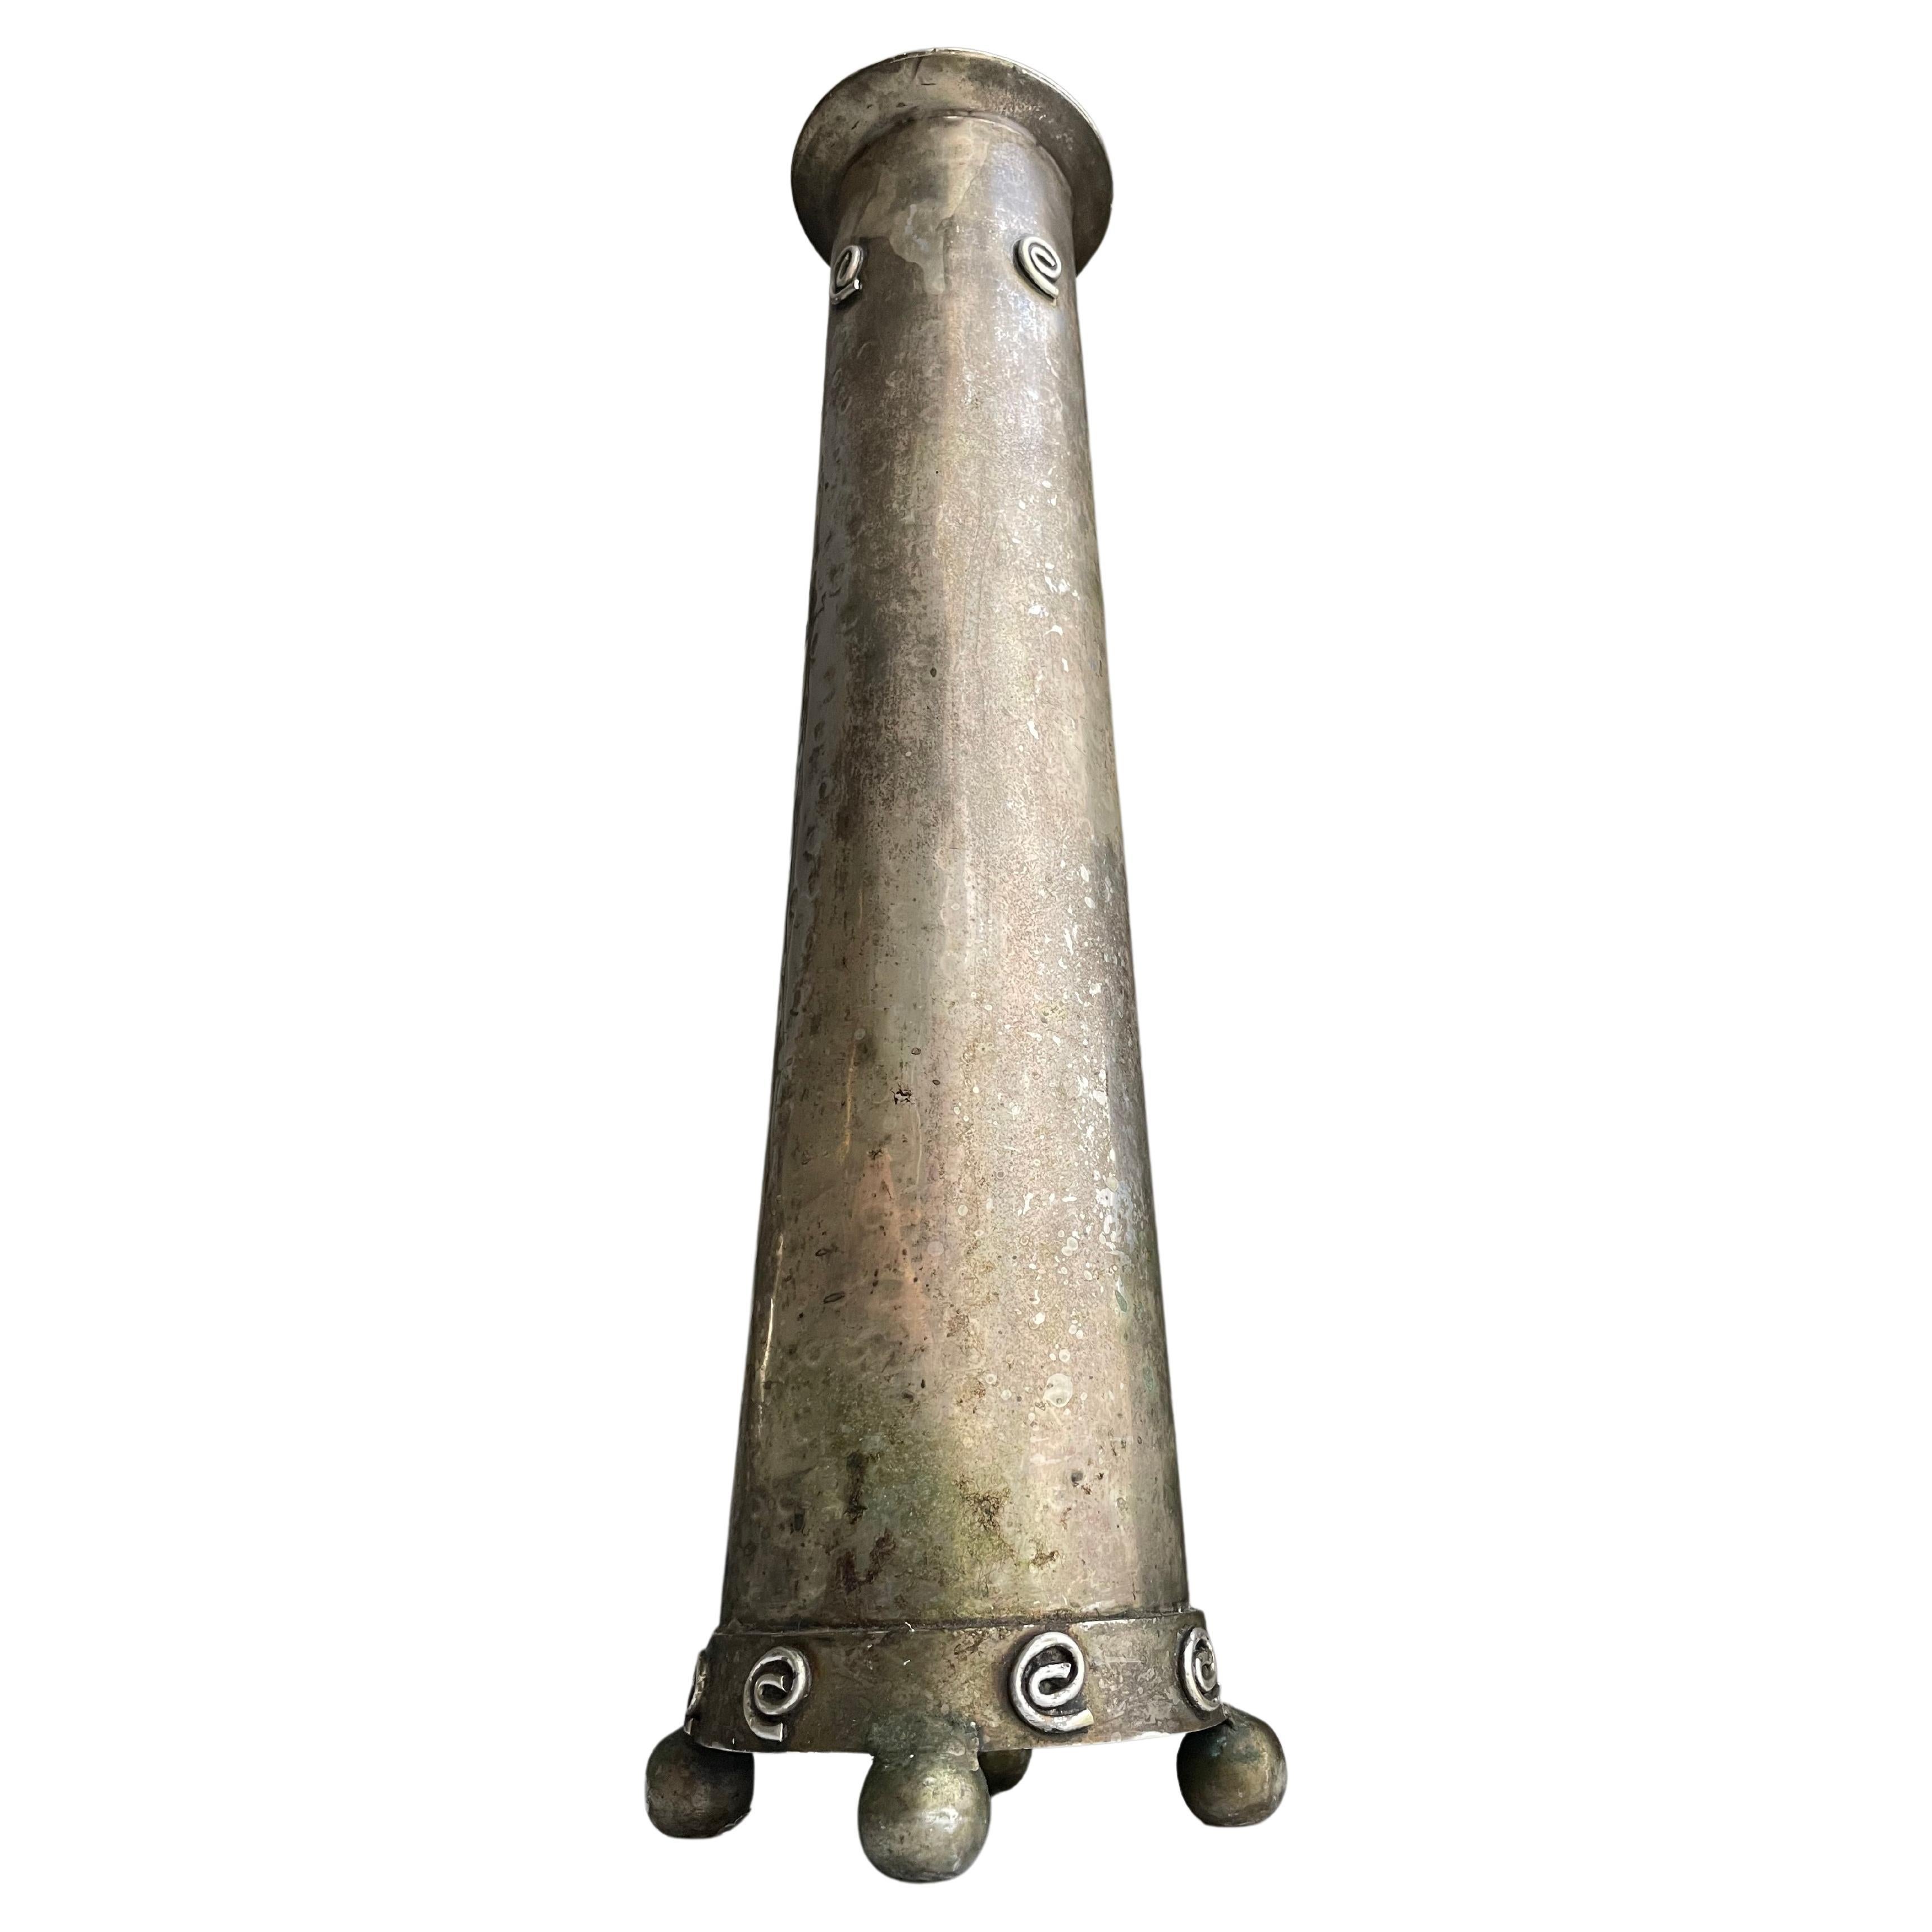 Antique silver patinated incense tower with spiral details on top and bottom. The tower sits atop ball feet for good circulation. 

This incense tower is made for burning incense cones on charcoal - a beautiful sight. It can be used for incense,